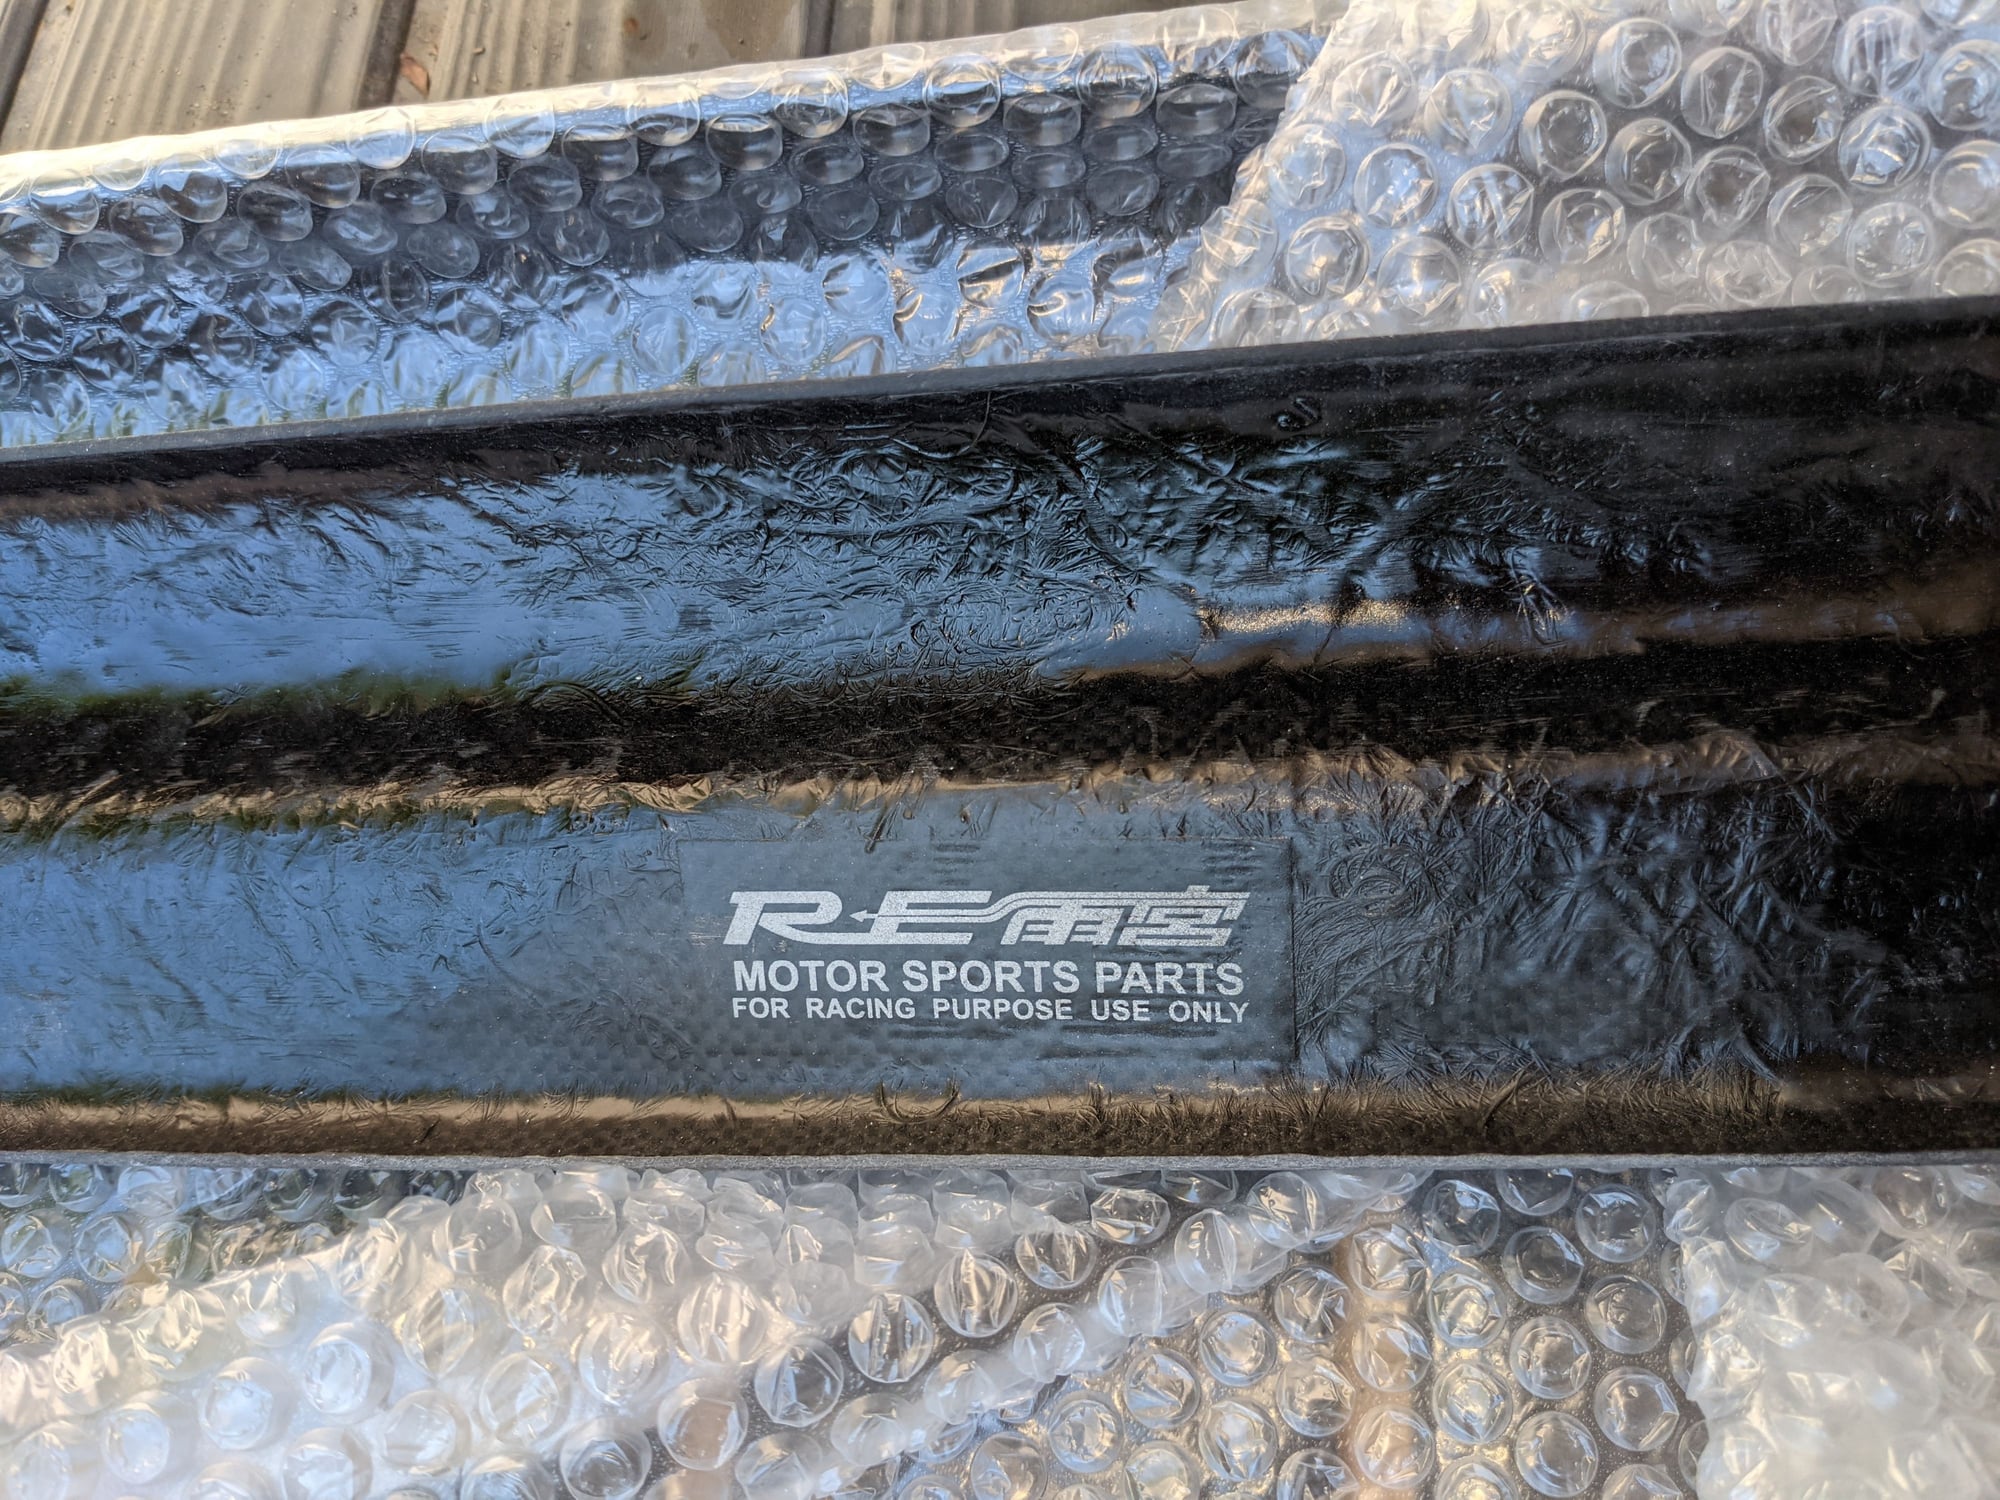 Interior/Upholstery - Re-amemiya wet carbon scuff plates - fd3s - New - 1993 to 2002 Mazda RX-7 - Chandler, AZ 85249, United States